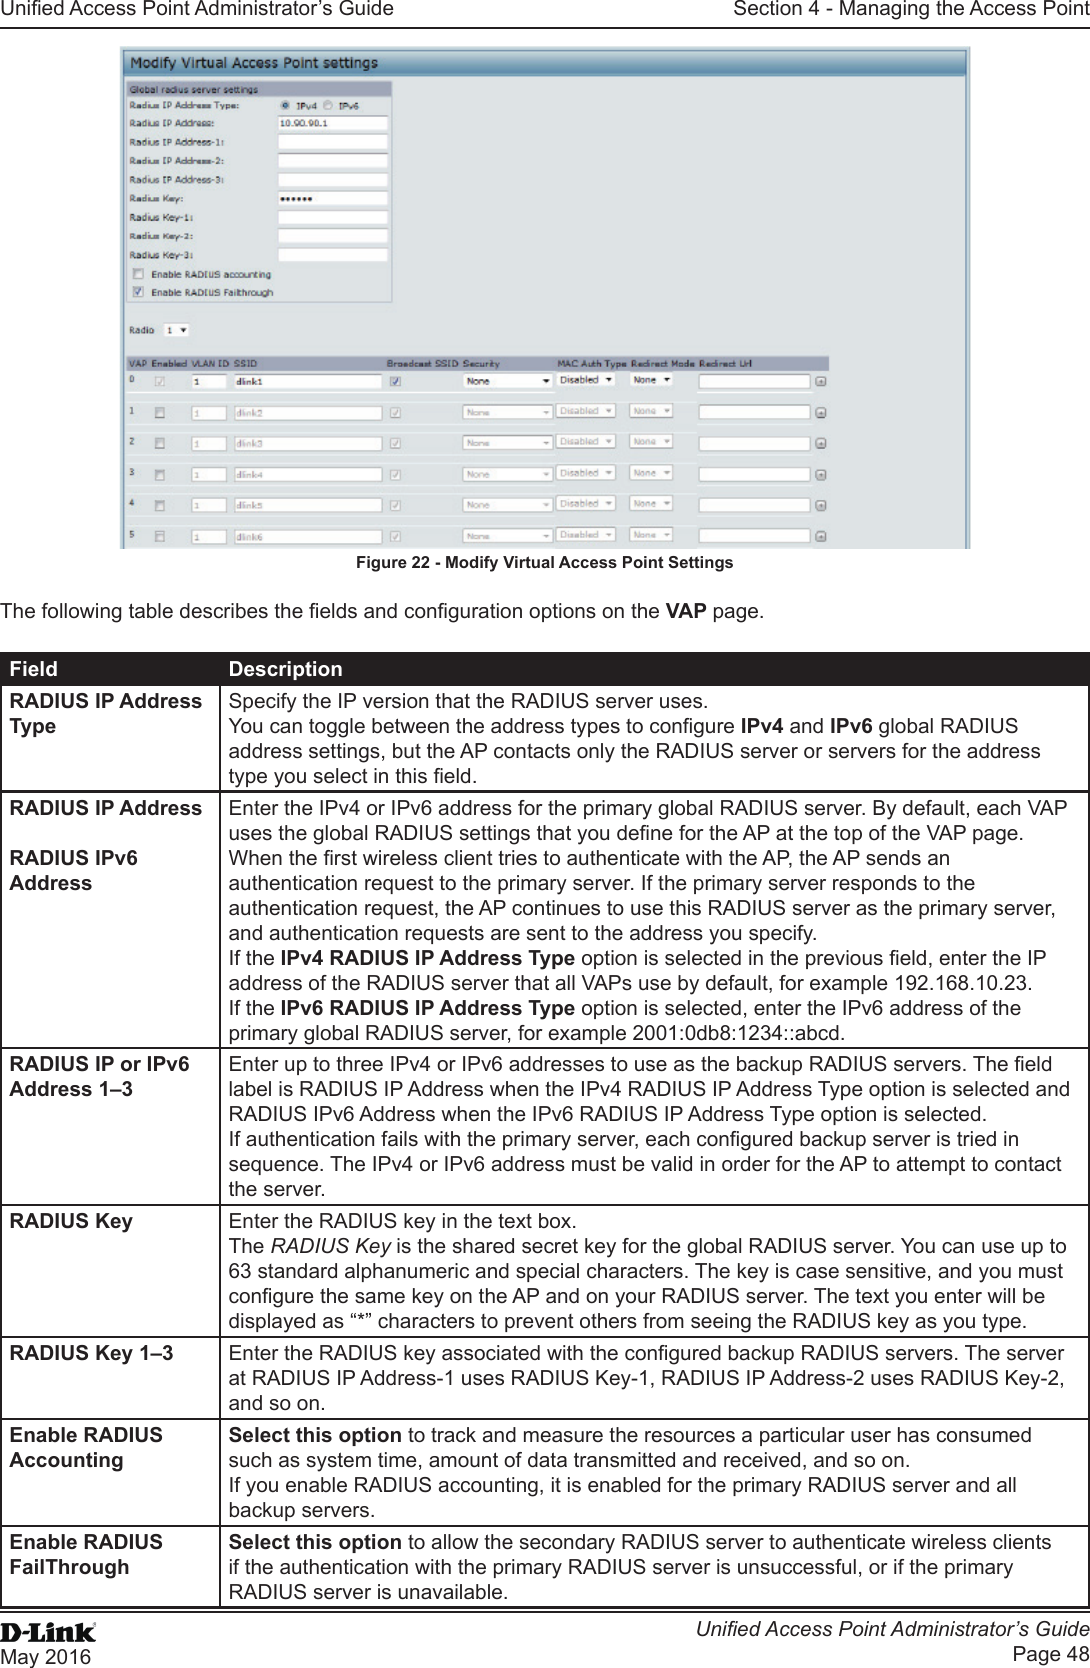 Unied Access Point Administrator’s GuideUnied Access Point Administrator’s GuidePage 48May 2016Section 4 - Managing the Access PointFigure 22 - Modify Virtual Access Point SettingsThe following table describes the elds and conguration options on the VAP page.Field DescriptionRADIUS IP Address TypeSpecify the IP version that the RADIUS server uses.You can toggle between the address types to congure IPv4 and IPv6 global RADIUS address settings, but the AP contacts only the RADIUS server or servers for the address type you select in this eld.RADIUS IP Address RADIUS IPv6 AddressEnter the IPv4 or IPv6 address for the primary global RADIUS server. By default, each VAP uses the global RADIUS settings that you dene for the AP at the top of the VAP page.When the rst wireless client tries to authenticate with the AP, the AP sends an authentication request to the primary server. If the primary server responds to the authentication request, the AP continues to use this RADIUS server as the primary server, and authentication requests are sent to the address you specify.If the IPv4 RADIUS IP Address Type option is selected in the previous eld, enter the IP address of the RADIUS server that all VAPs use by default, for example 192.168.10.23. If the IPv6 RADIUS IP Address Type option is selected, enter the IPv6 address of the primary global RADIUS server, for example 2001:0db8:1234::abcd.RADIUS IP or IPv6 Address 1–3Enter up to three IPv4 or IPv6 addresses to use as the backup RADIUS servers. The eld label is RADIUS IP Address when the IPv4 RADIUS IP Address Type option is selected and RADIUS IPv6 Address when the IPv6 RADIUS IP Address Type option is selected.If authentication fails with the primary server, each congured backup server is tried in sequence. The IPv4 or IPv6 address must be valid in order for the AP to attempt to contact the server.RADIUS Key Enter the RADIUS key in the text box.The RADIUS Key is the shared secret key for the global RADIUS server. You can use up to 63 standard alphanumeric and special characters. The key is case sensitive, and you must congure the same key on the AP and on your RADIUS server. The text you enter will be displayed as “*” characters to prevent others from seeing the RADIUS key as you type.RADIUS Key 1–3 Enter the RADIUS key associated with the congured backup RADIUS servers. The server at RADIUS IP Address-1 uses RADIUS Key-1, RADIUS IP Address-2 uses RADIUS Key-2, and so on.Enable RADIUS AccountingSelect this option to track and measure the resources a particular user has consumed such as system time, amount of data transmitted and received, and so on.If you enable RADIUS accounting, it is enabled for the primary RADIUS server and all backup servers.Enable RADIUS FailThroughSelect this option to allow the secondary RADIUS server to authenticate wireless clients if the authentication with the primary RADIUS server is unsuccessful, or if the primary RADIUS server is unavailable.